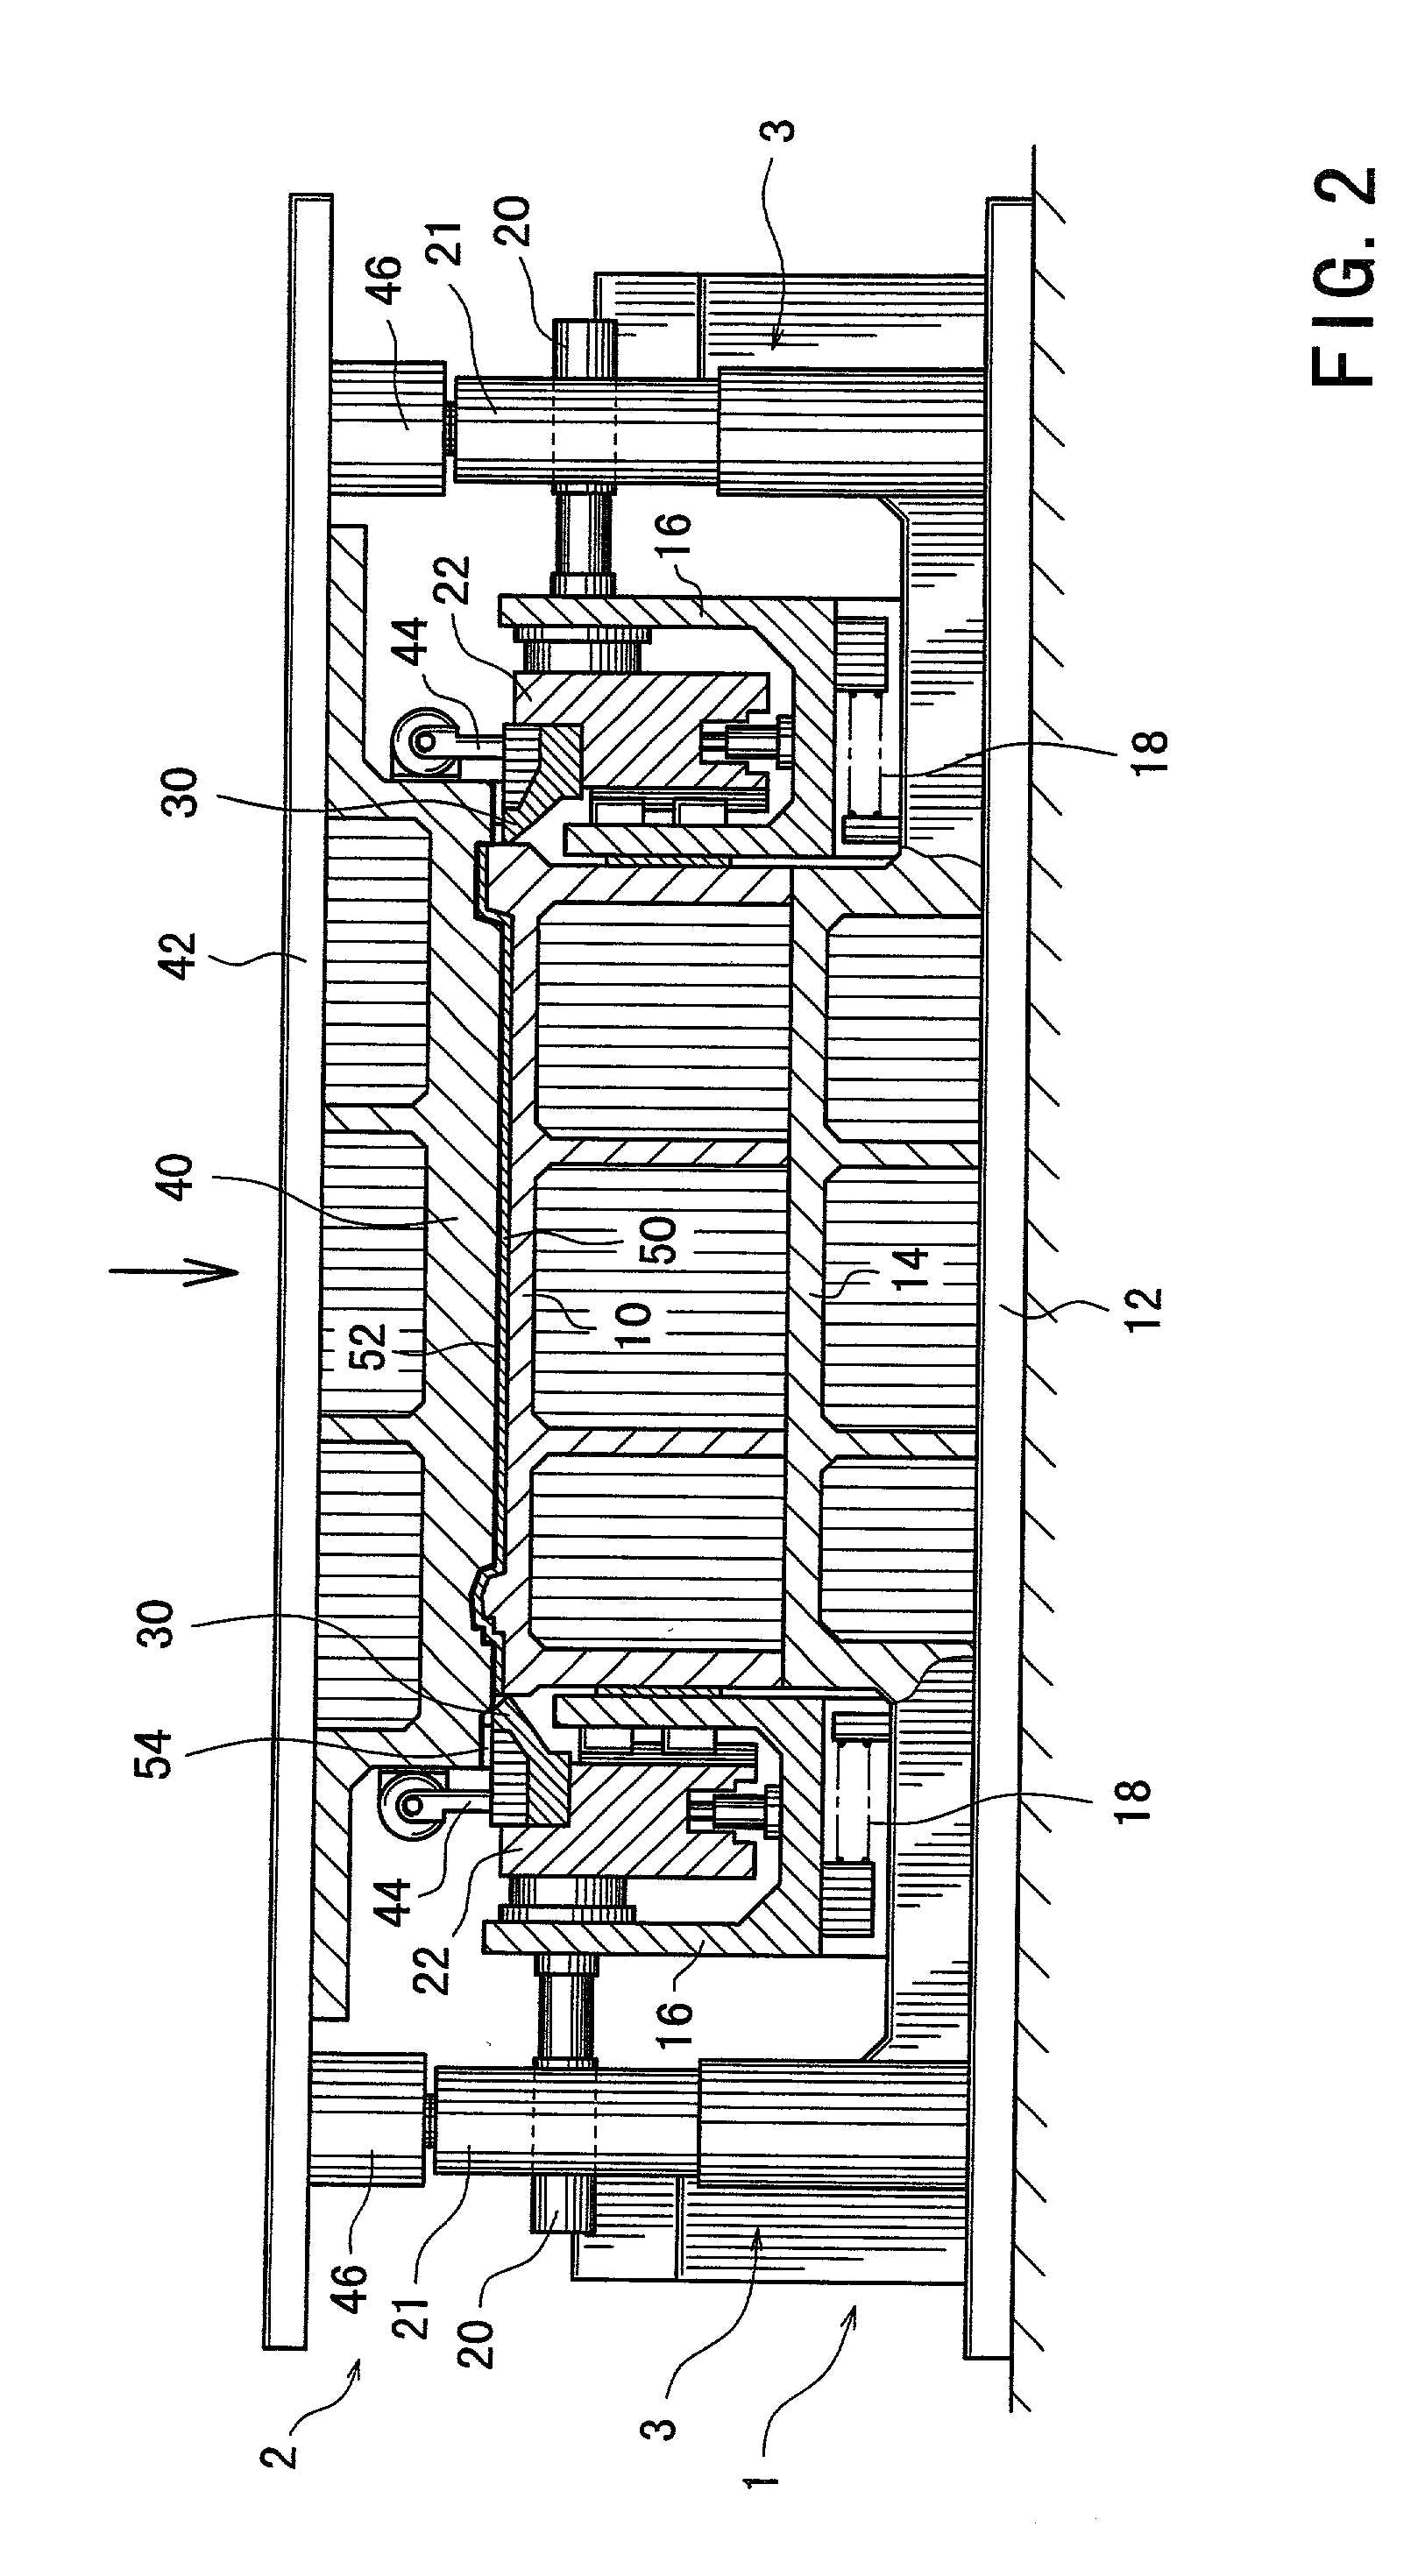 Methods and apparatus for manufacturing molded articles